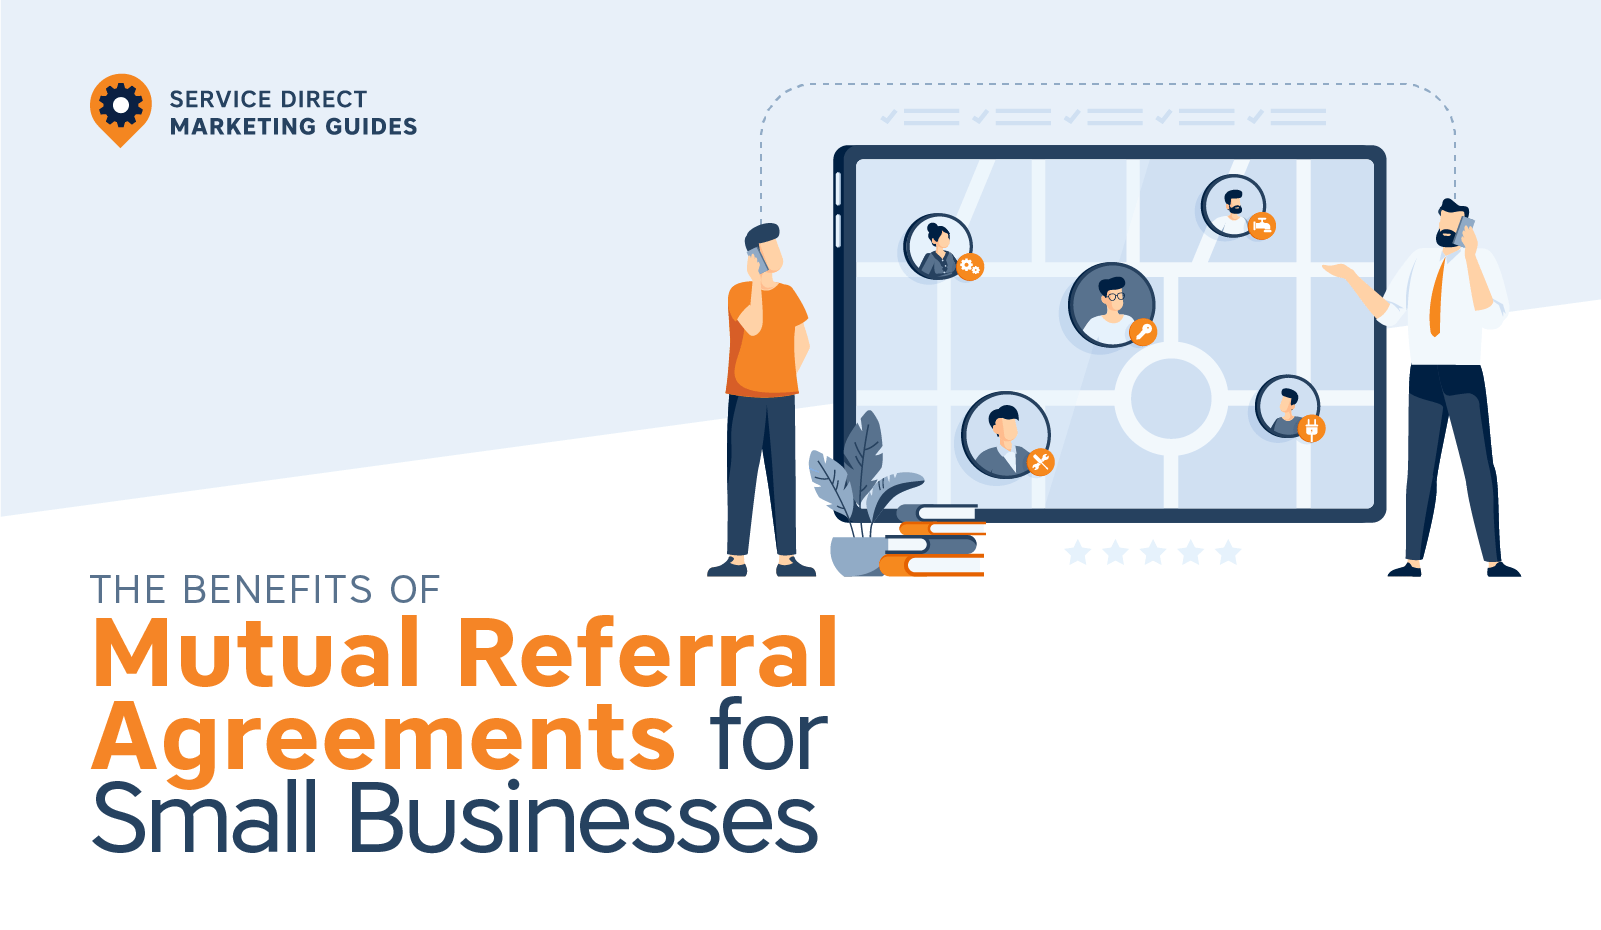 The Benefits of Mutual Referral Agreements for Small Businesses